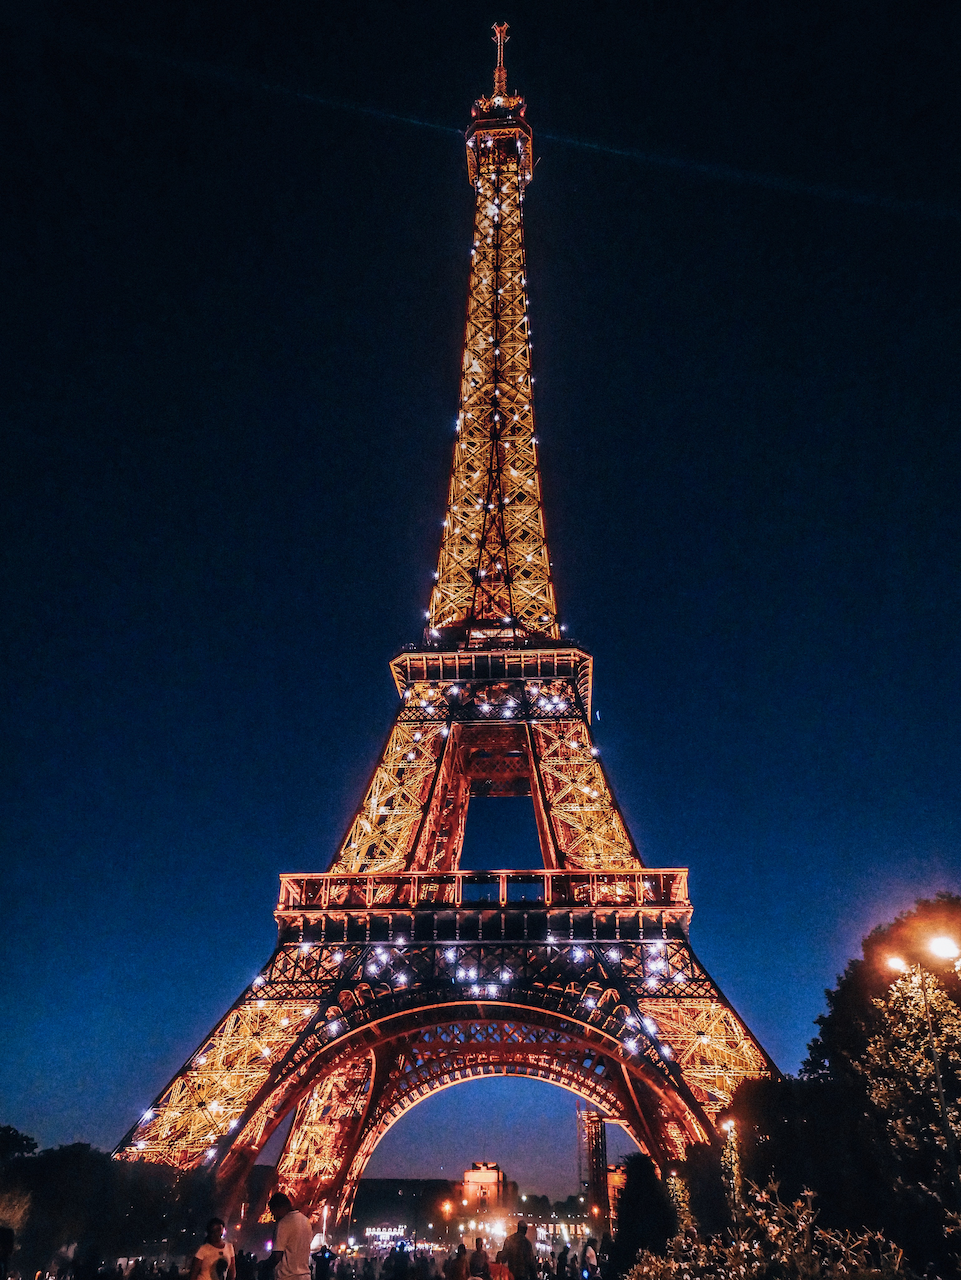 The Eiffel Tower lit up at night - Paris - France